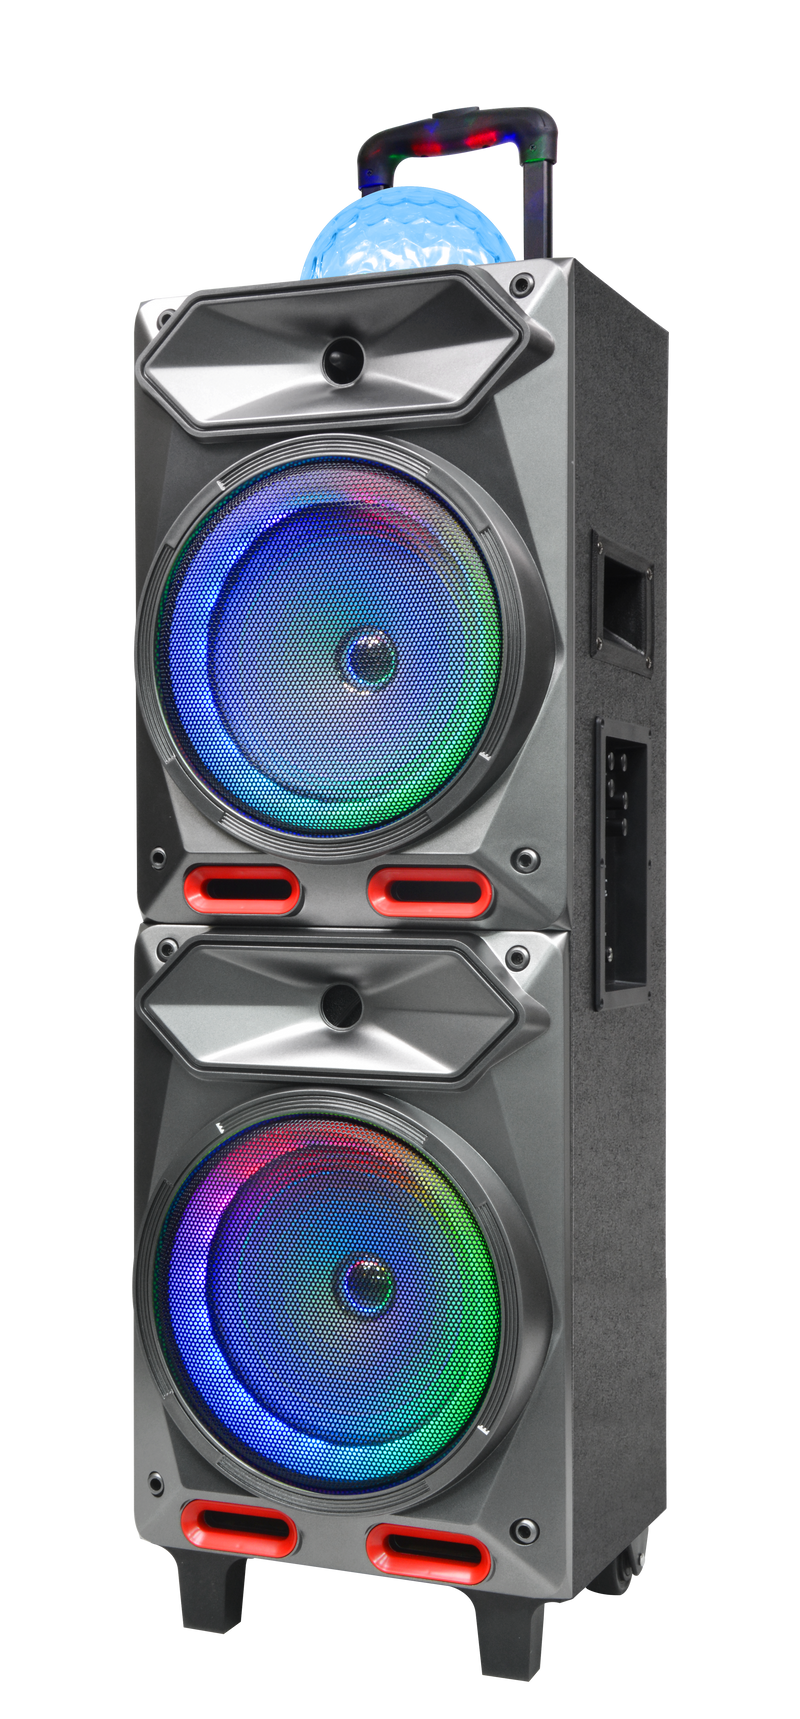 MAXPOWER MPD6207 8" X 2 Karaoke rechargeable speaker with LED dancing lights around the woofer, mic & remote